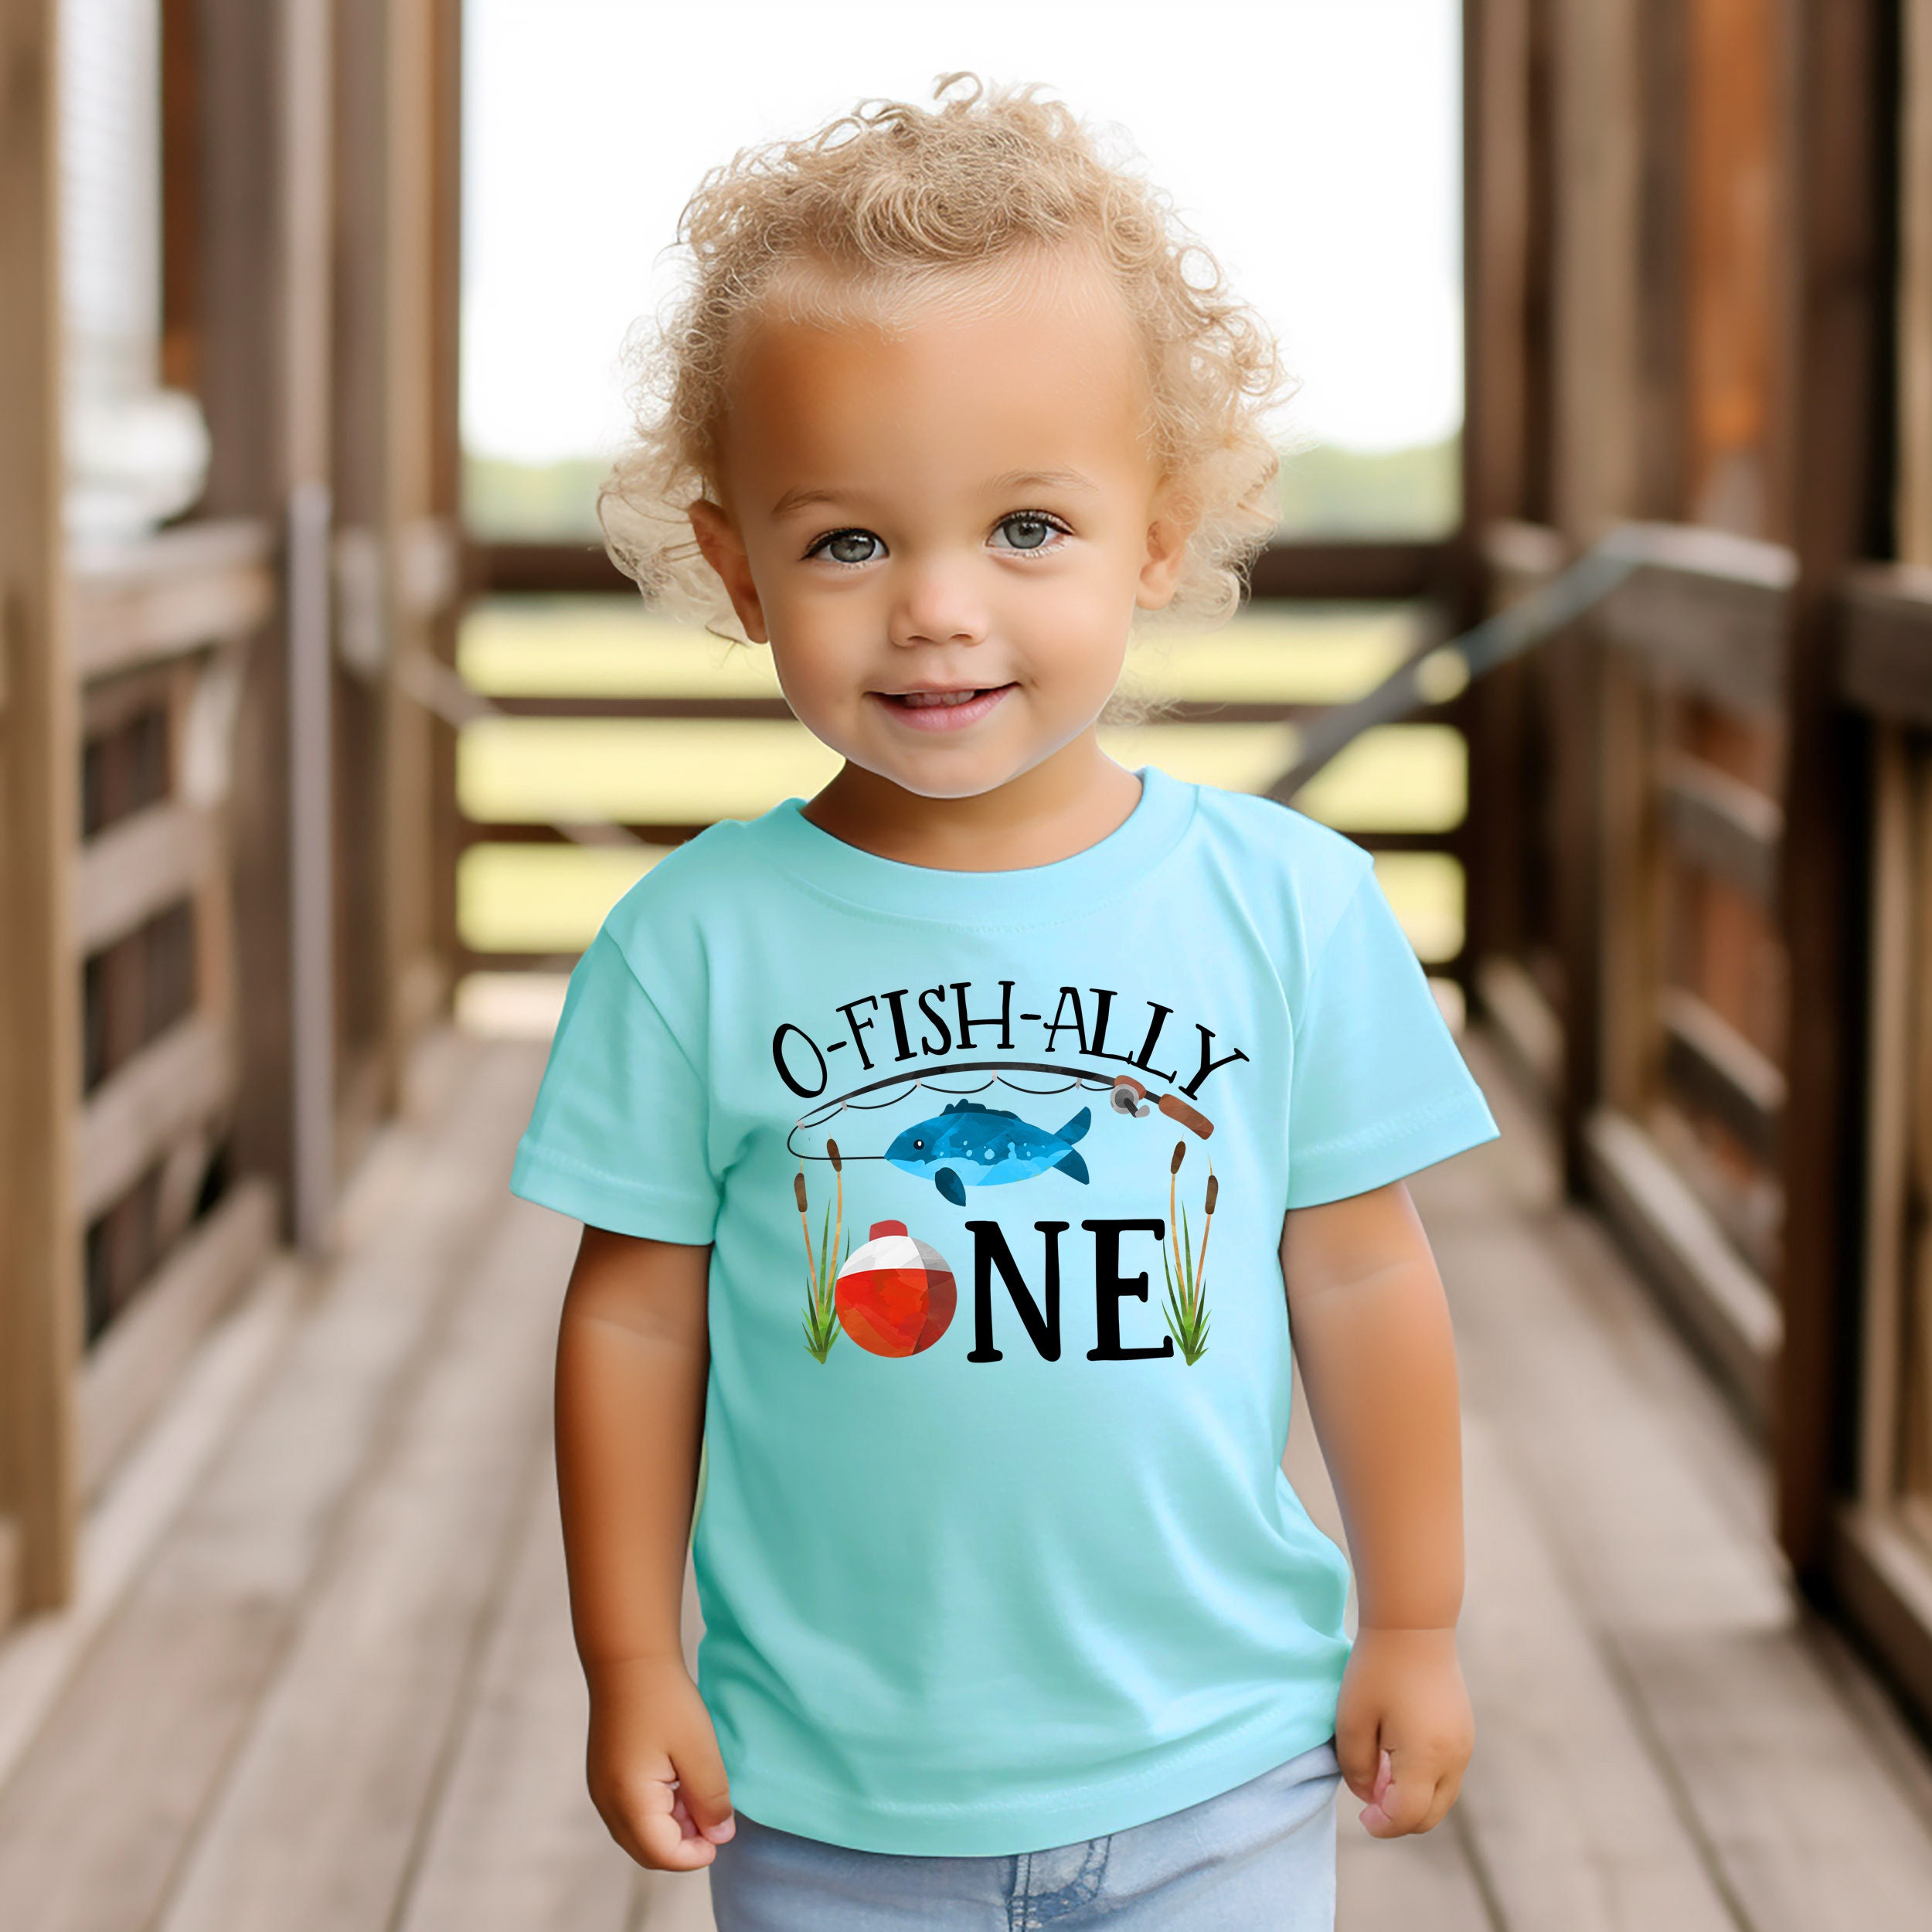 O-fish-ally-one Boys 1st Birthday Fishing Themed Shirt for First